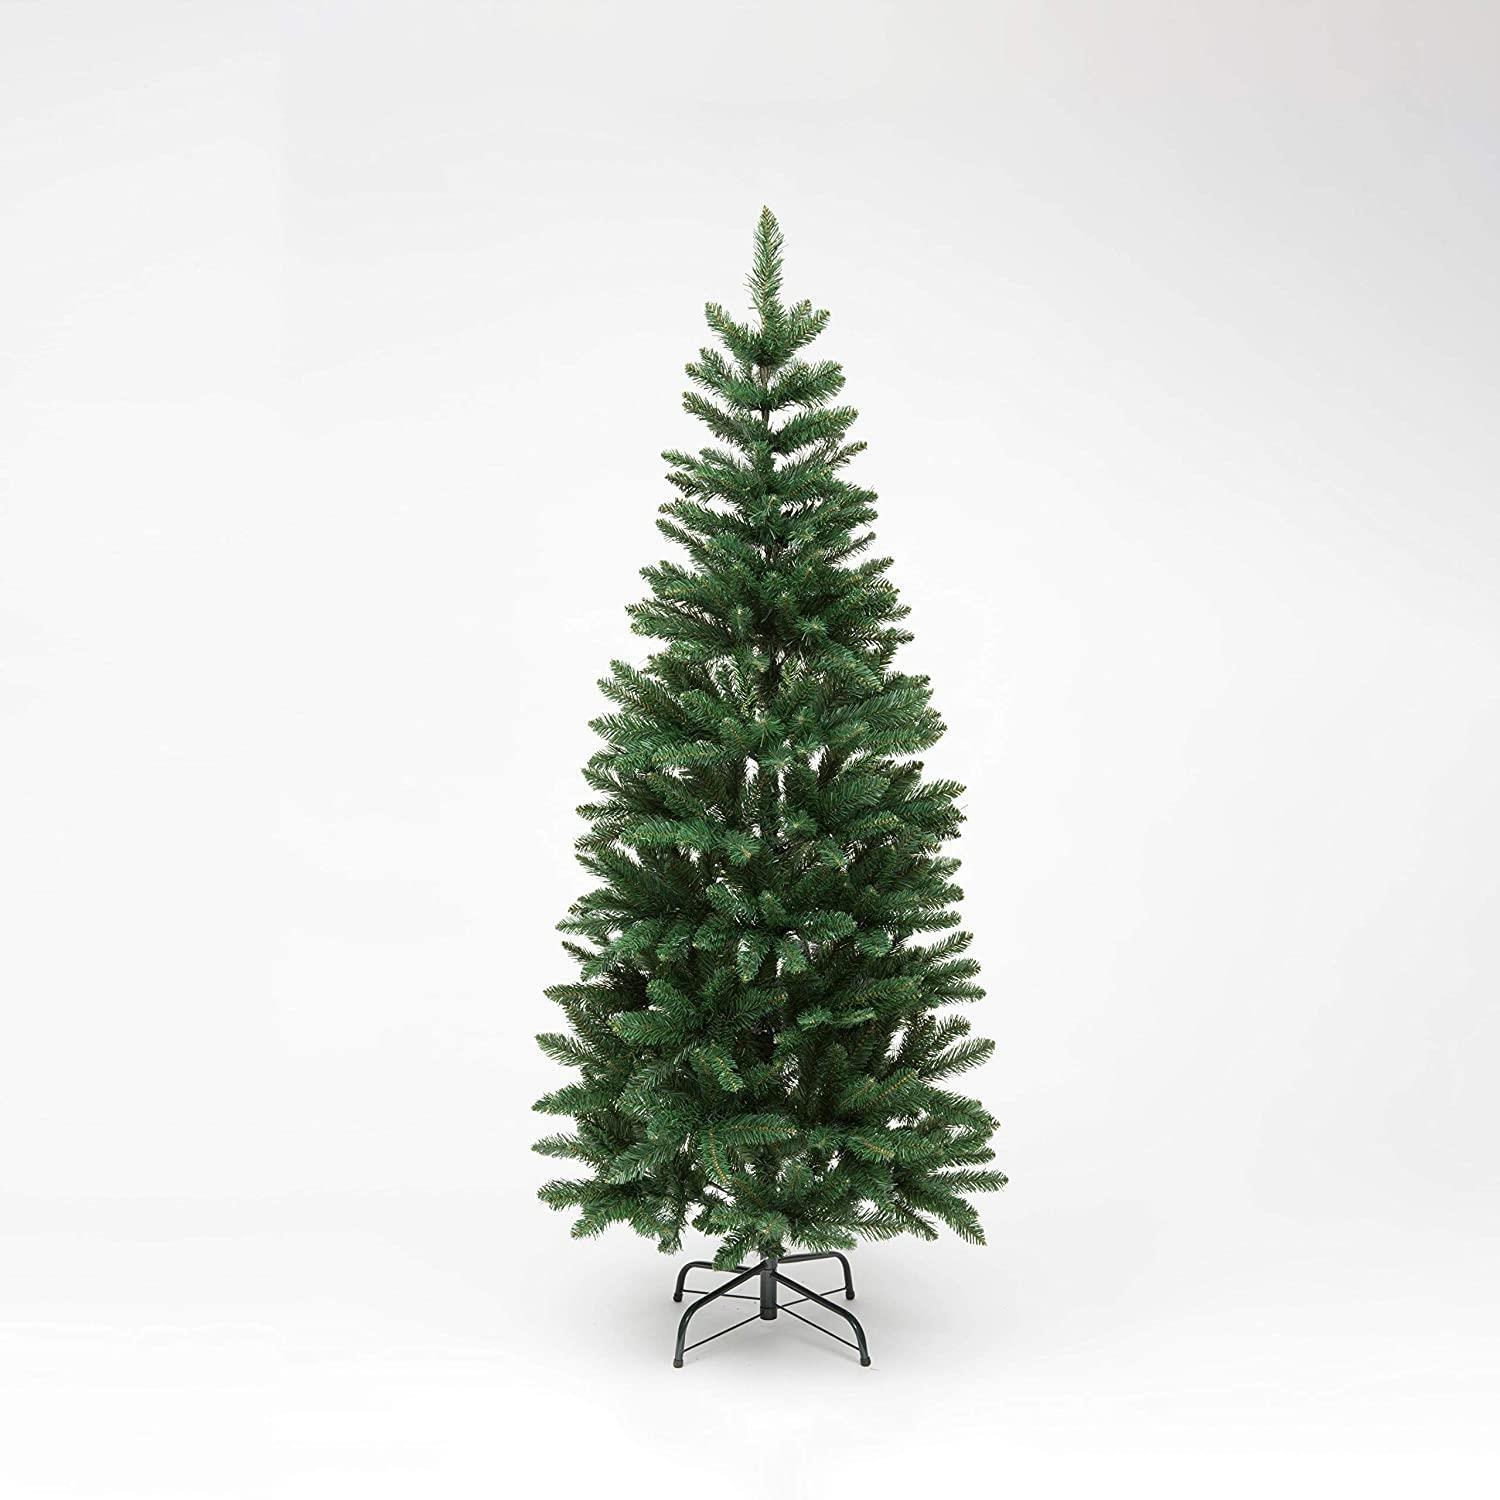 8FT Slim Pine Green Tree Christmas Holiday Festive Xmas Home Decorations with Pencil Point Tips